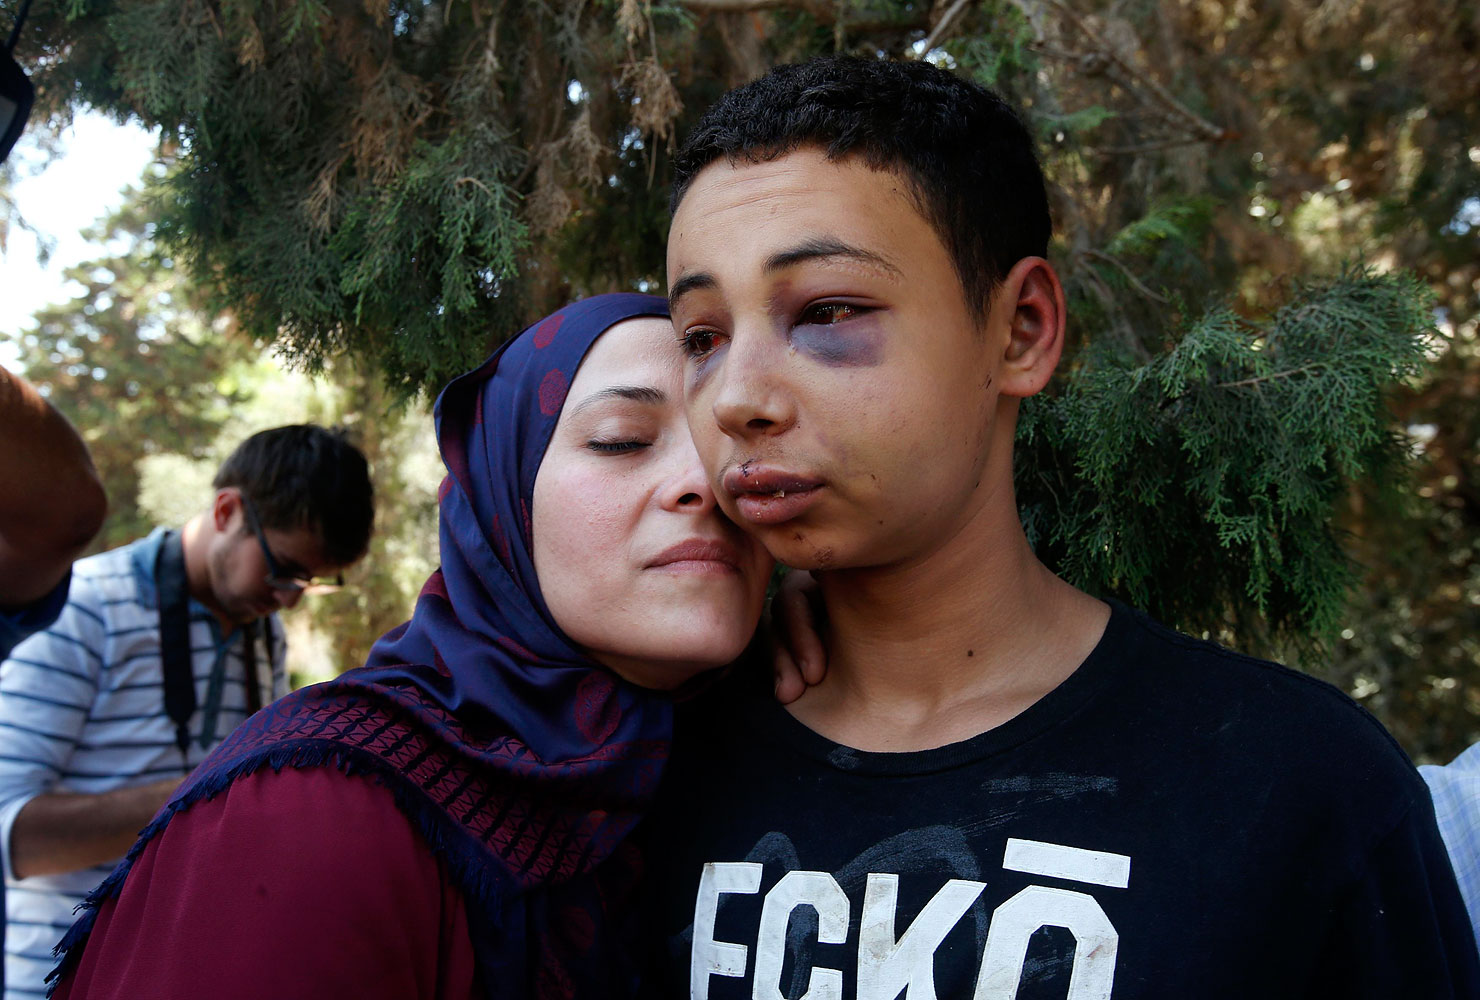 Tariq Khdeir, right, is greeted by his mother after being released from jail in Jerusalem July 6, 2014. (Ronen Zvulun—Reuters)